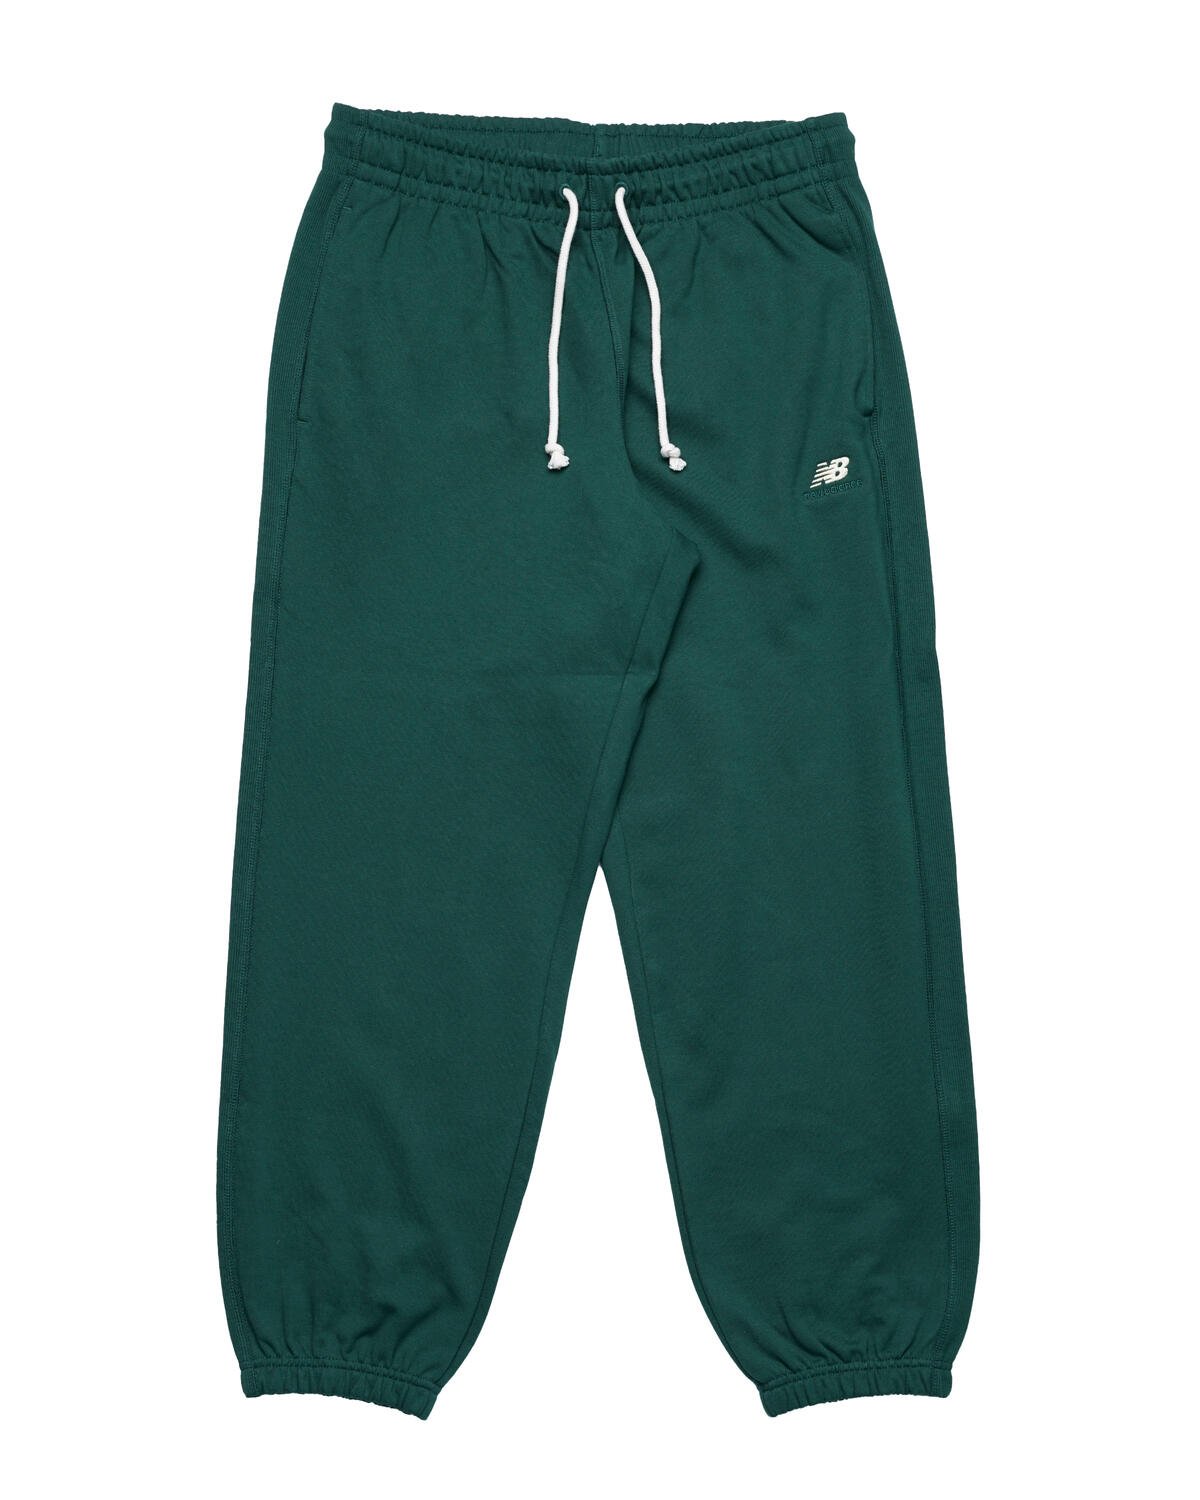 https://cdn.afew-store.com/assets/39/395585/1200/new-balance-athletics-remastered-french-terry-sweatpant-nightwgr-nwg-mp31503_nwg-apparel%20%3E%20pants-packshots-0.jpg